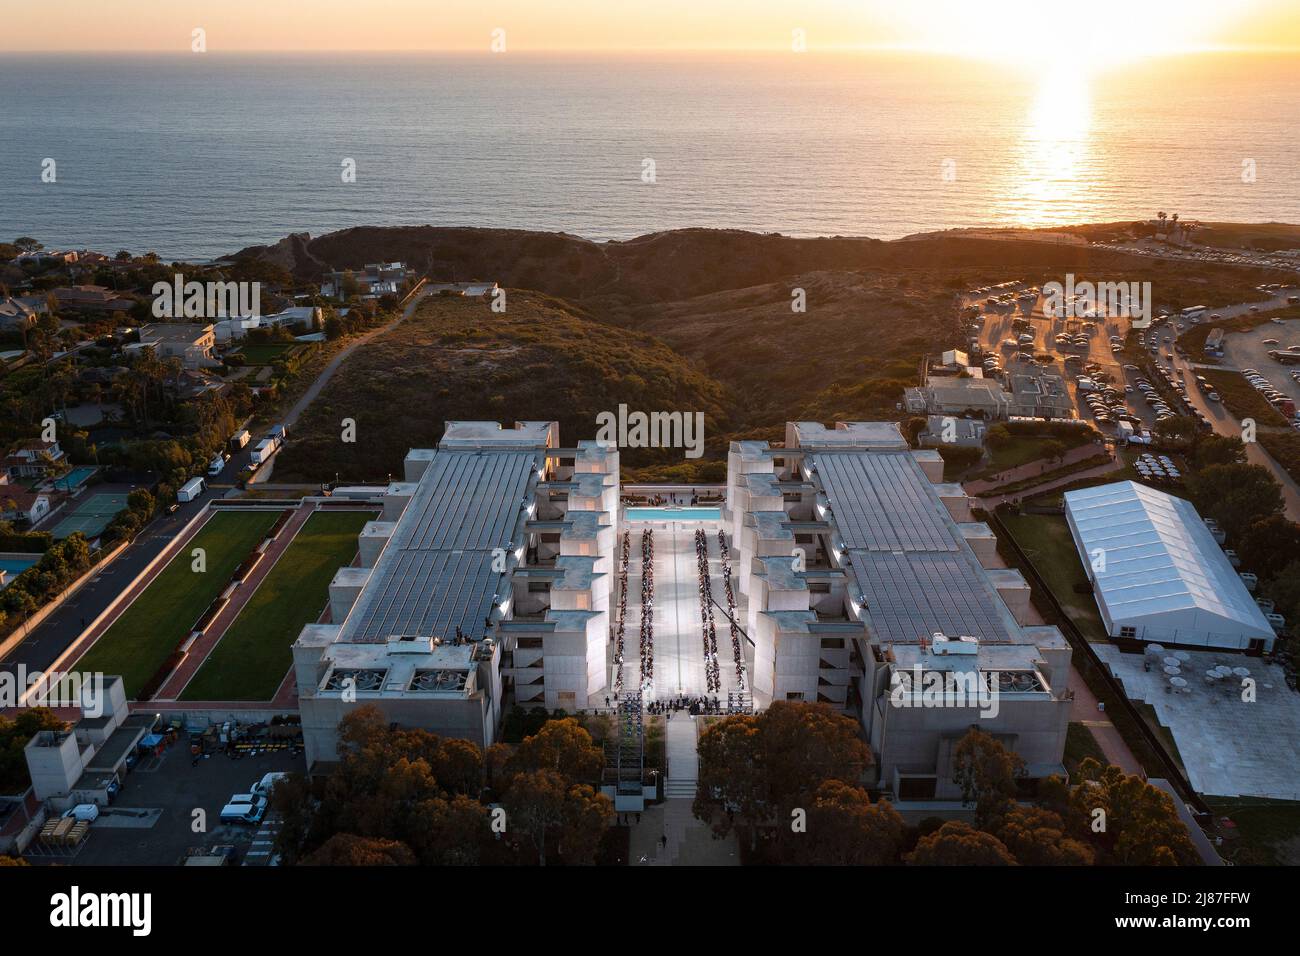 Louis Vuitton will showcase the 2023 Cruise Collection at the Salk Institute,  California